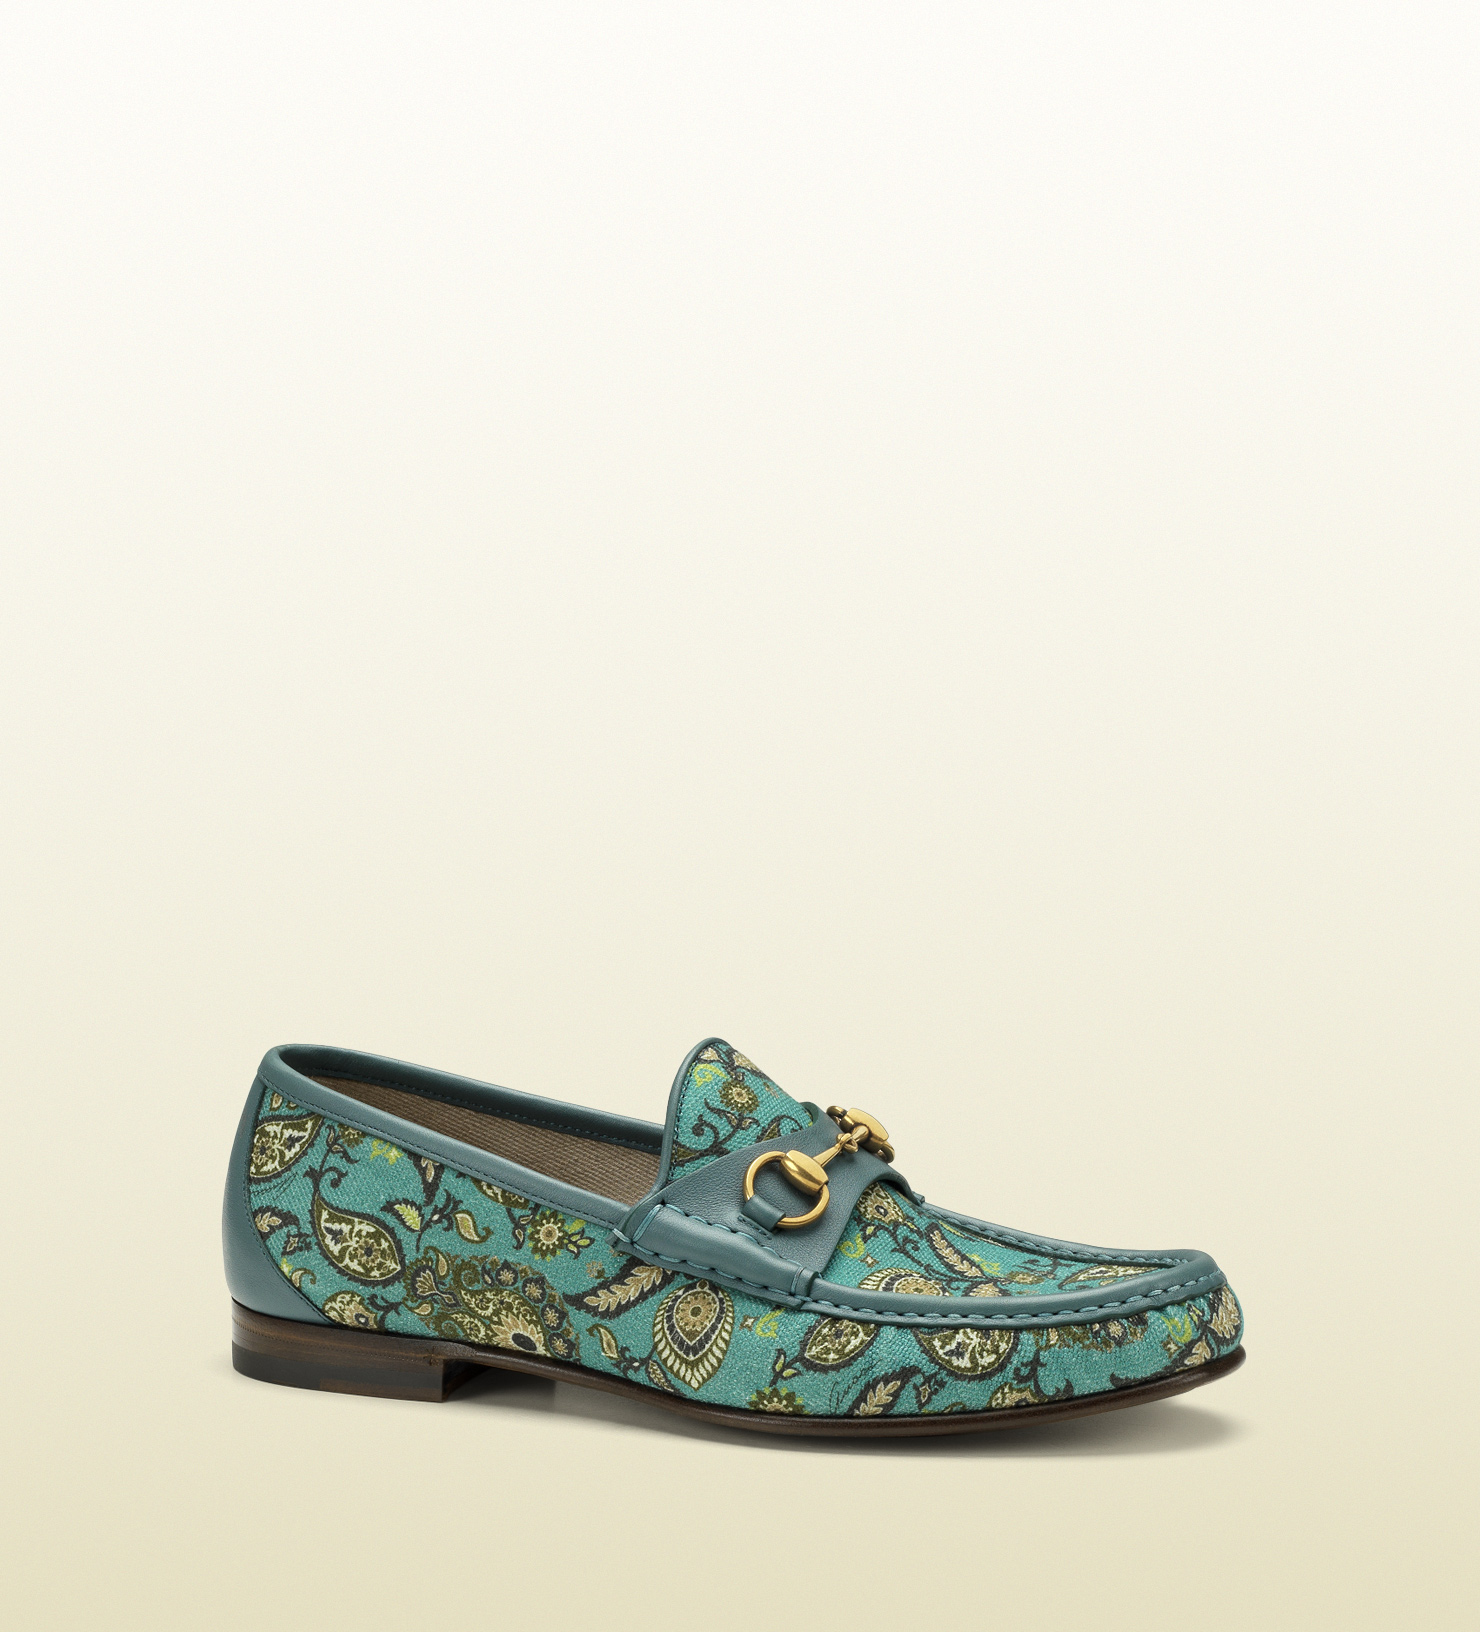 Gucci Horsebit Loafer in Paisley Canvas 